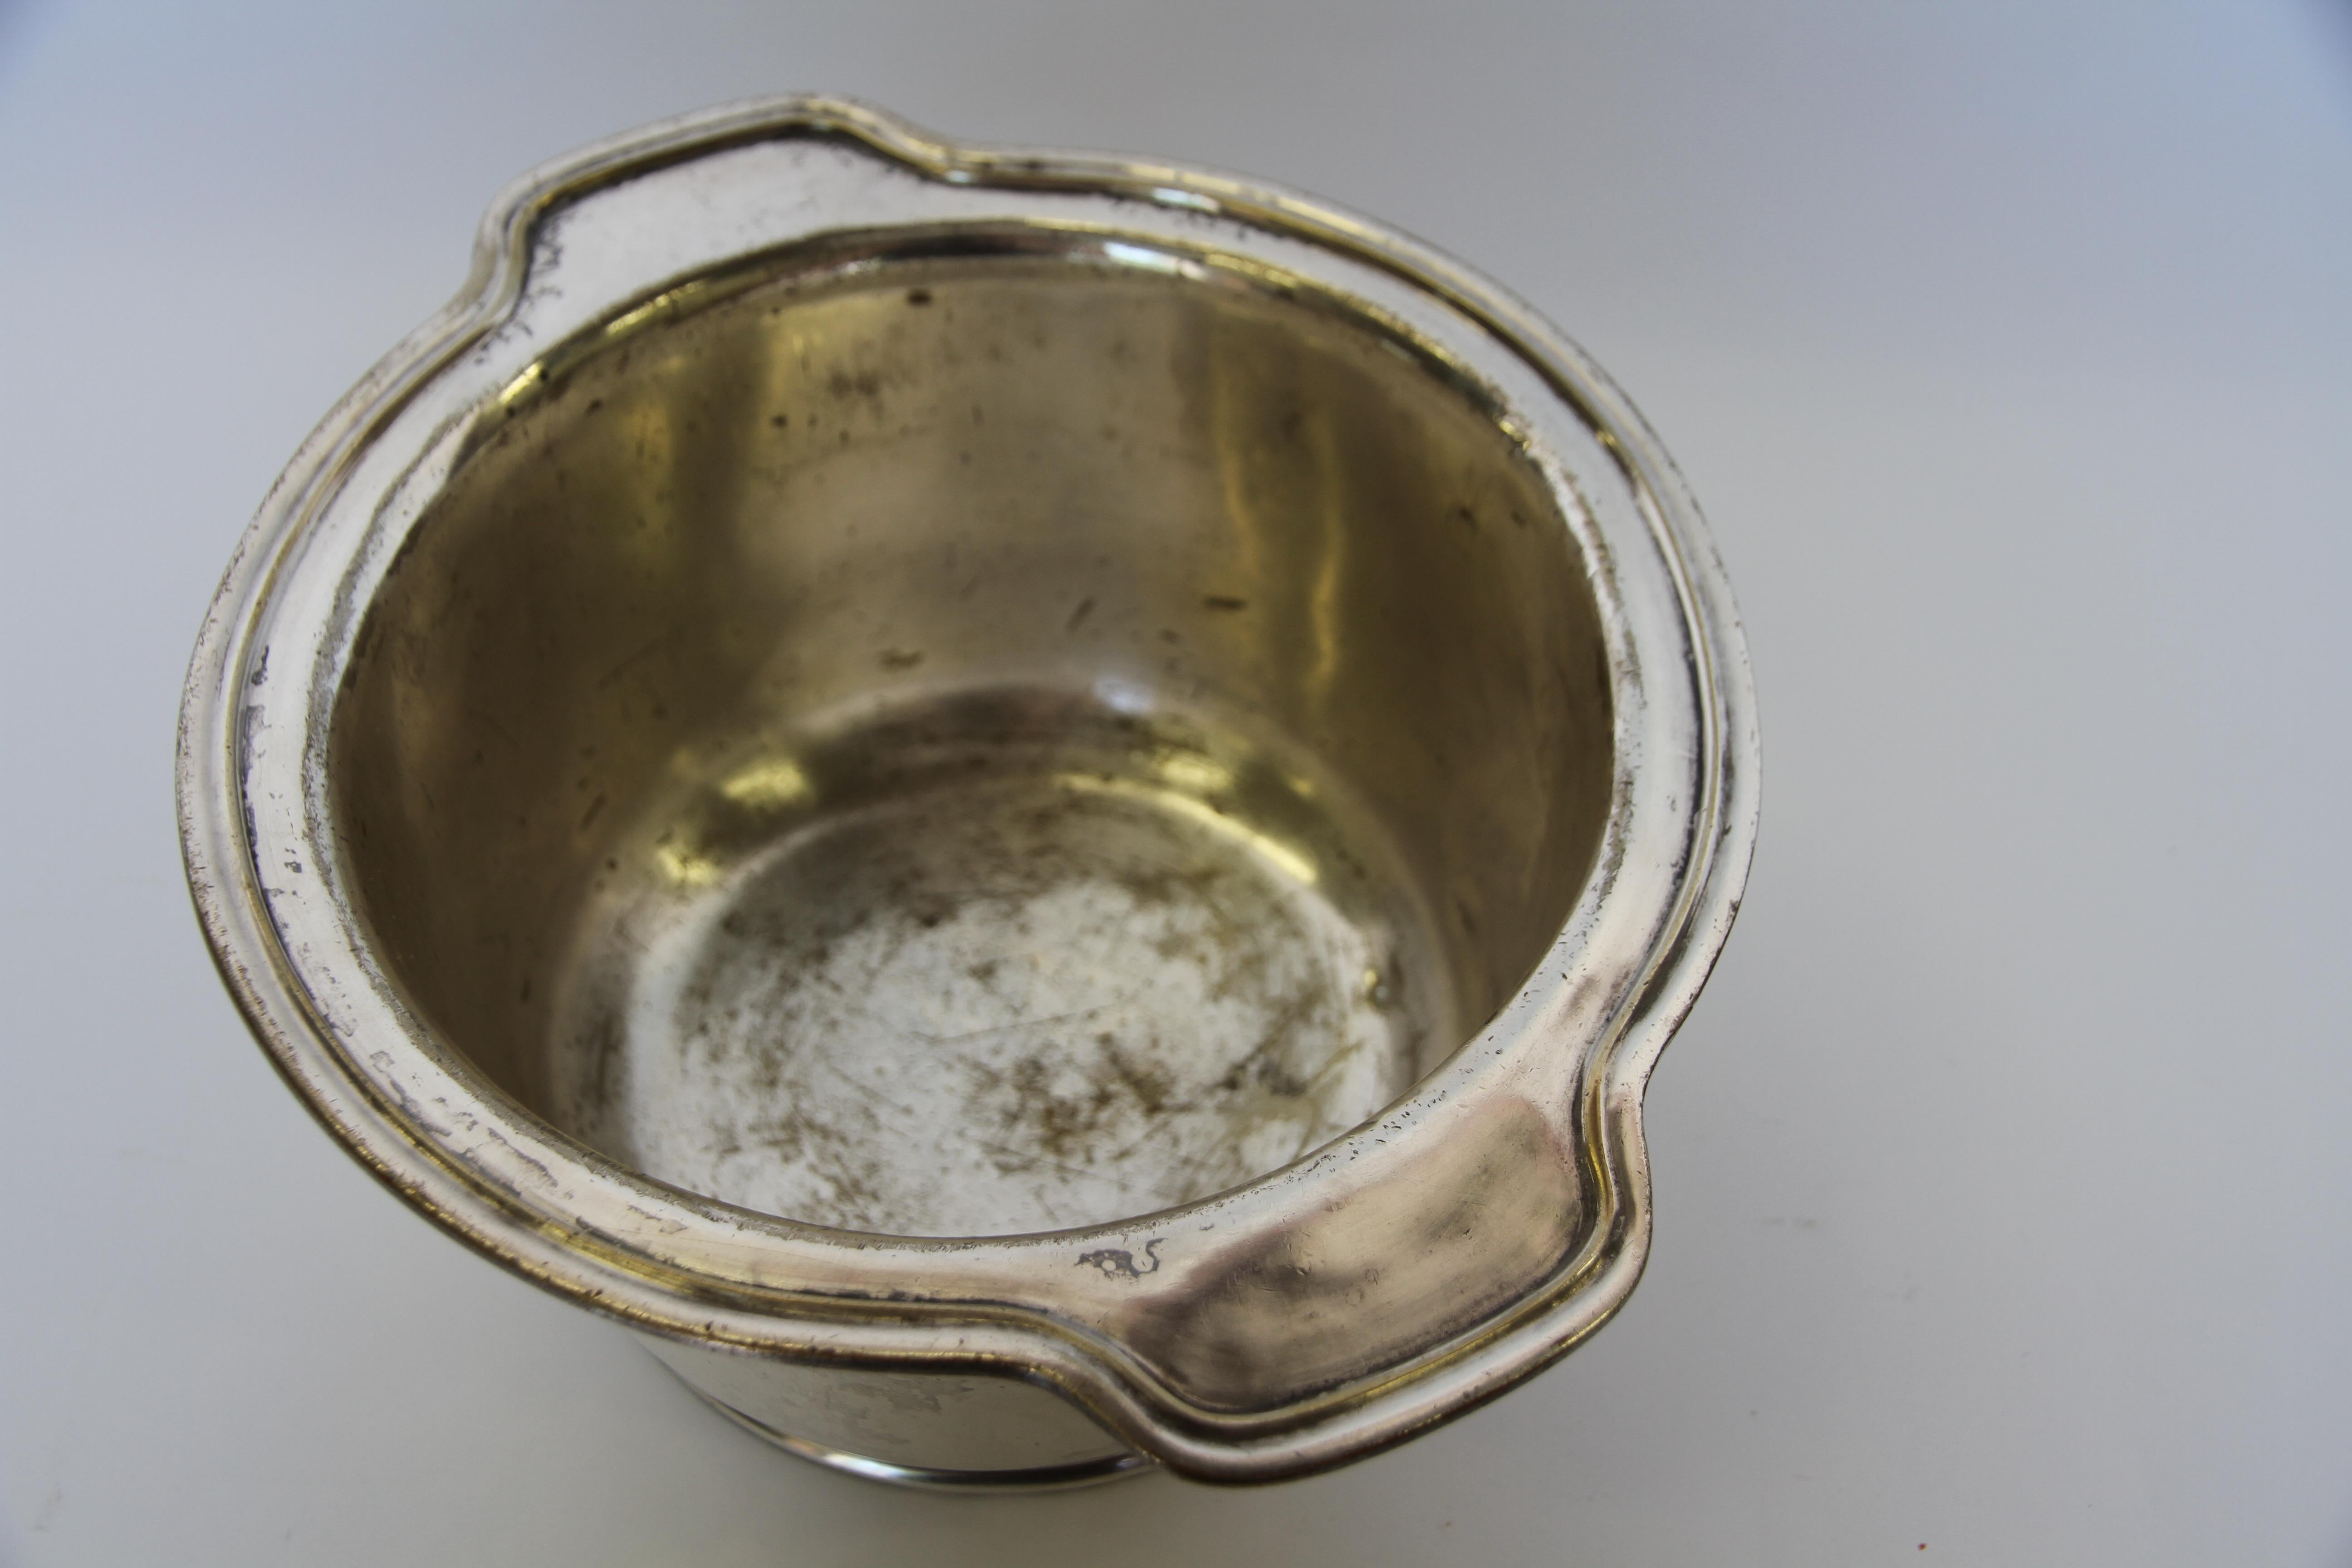 A silver soldered ice bowl or chiller made by the International Silver Company for the University of Notre Dame. With a classic shape these pieces were made extra dense and heavy so as not to spill when in use. Marked University of Notre,